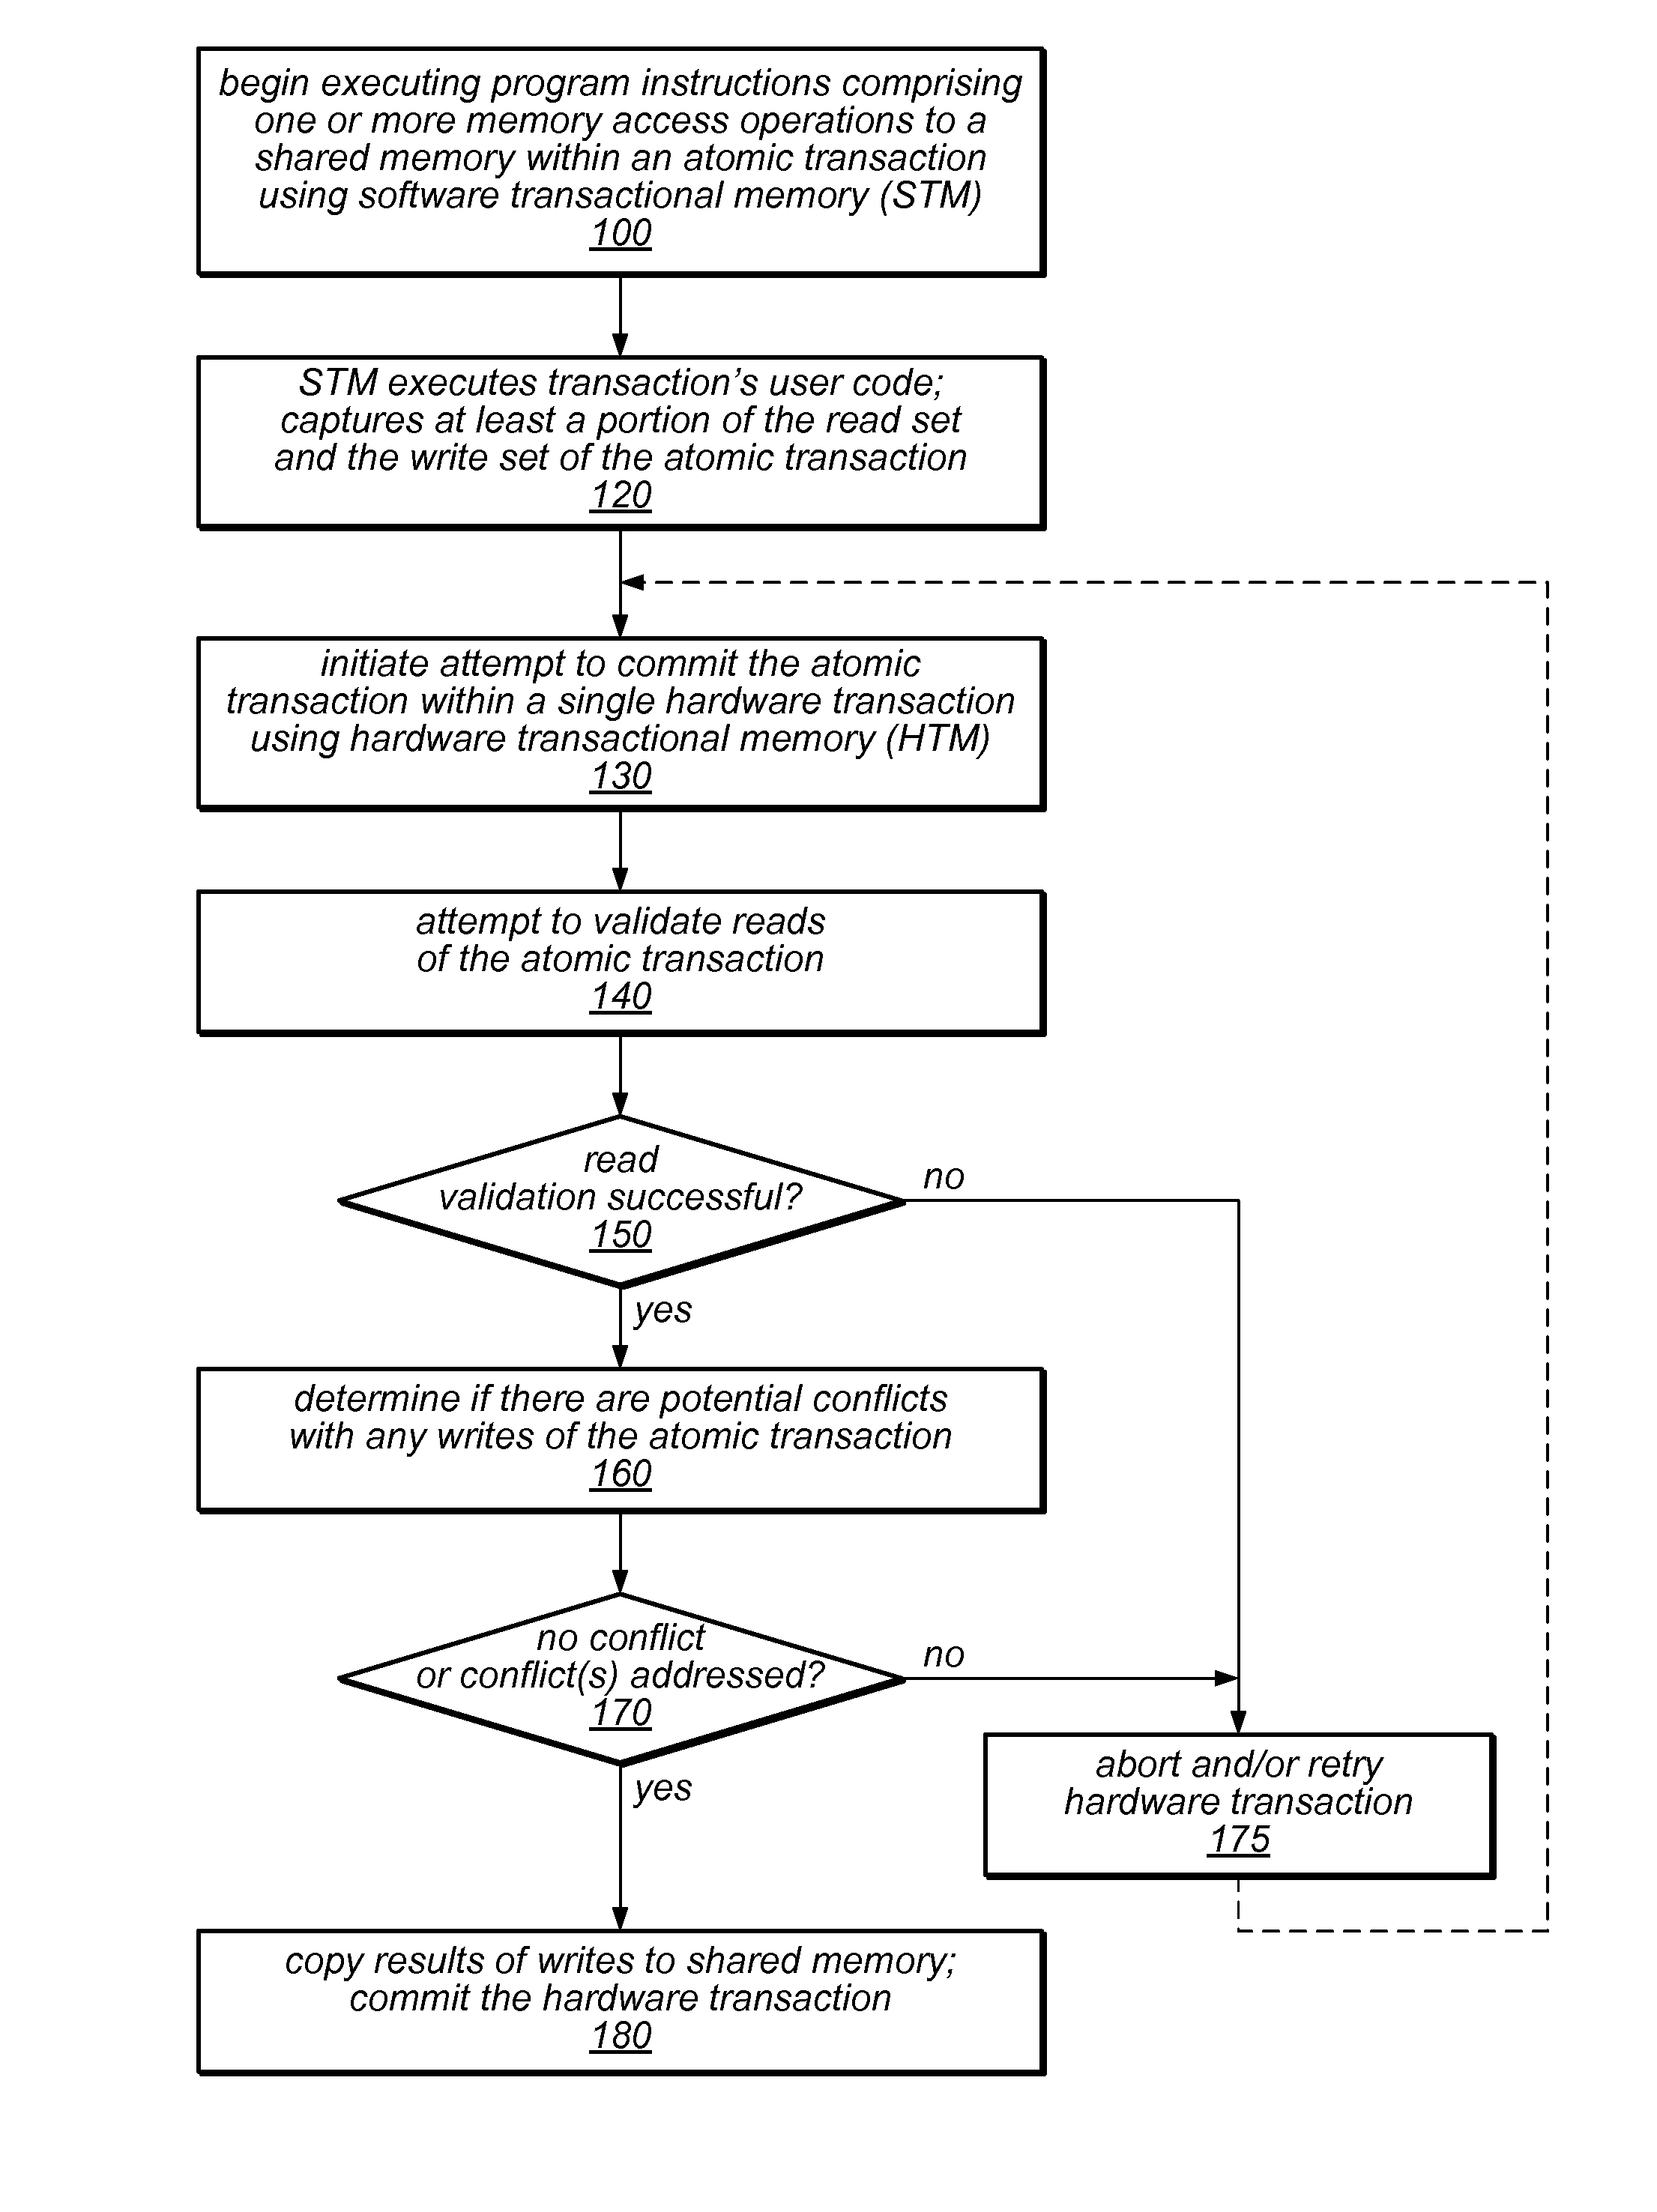 System and Method for Committing Results of a Software Transaction Using a Hardware Transaction